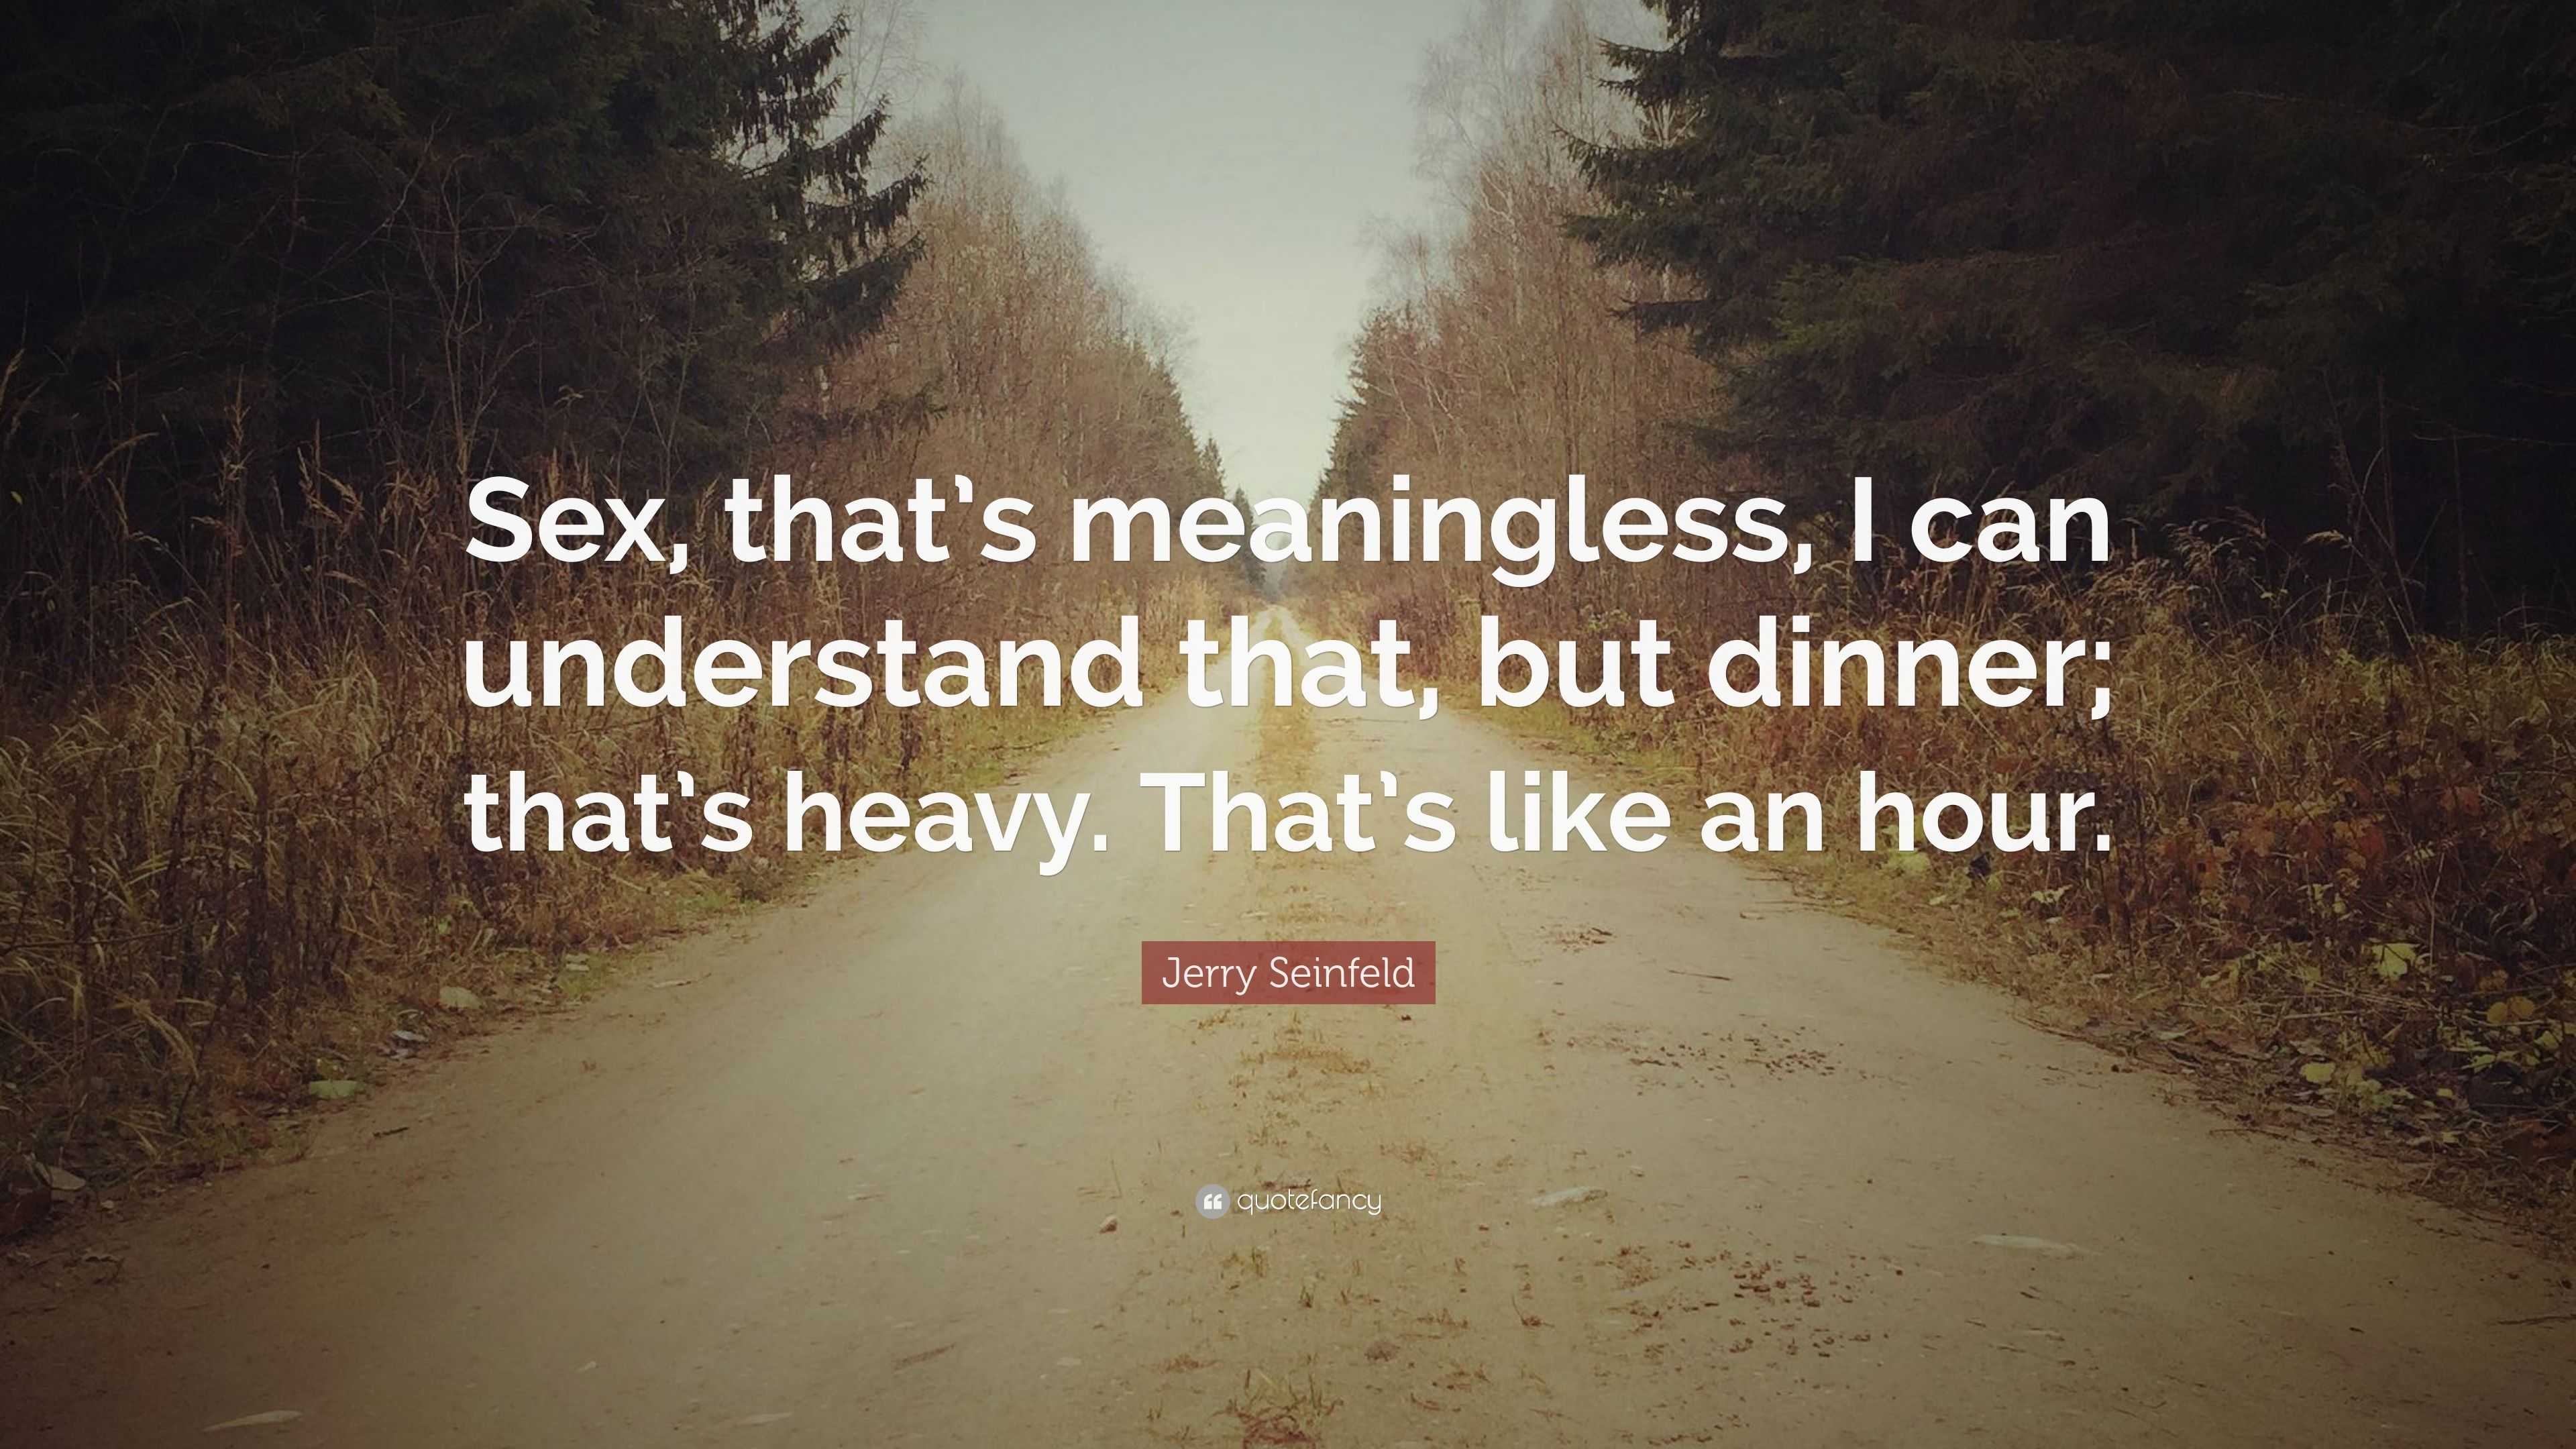 Jerry Seinfeld Quote “sex Thats Meaningless I Can Understand That But Dinner Thats Heavy 6659